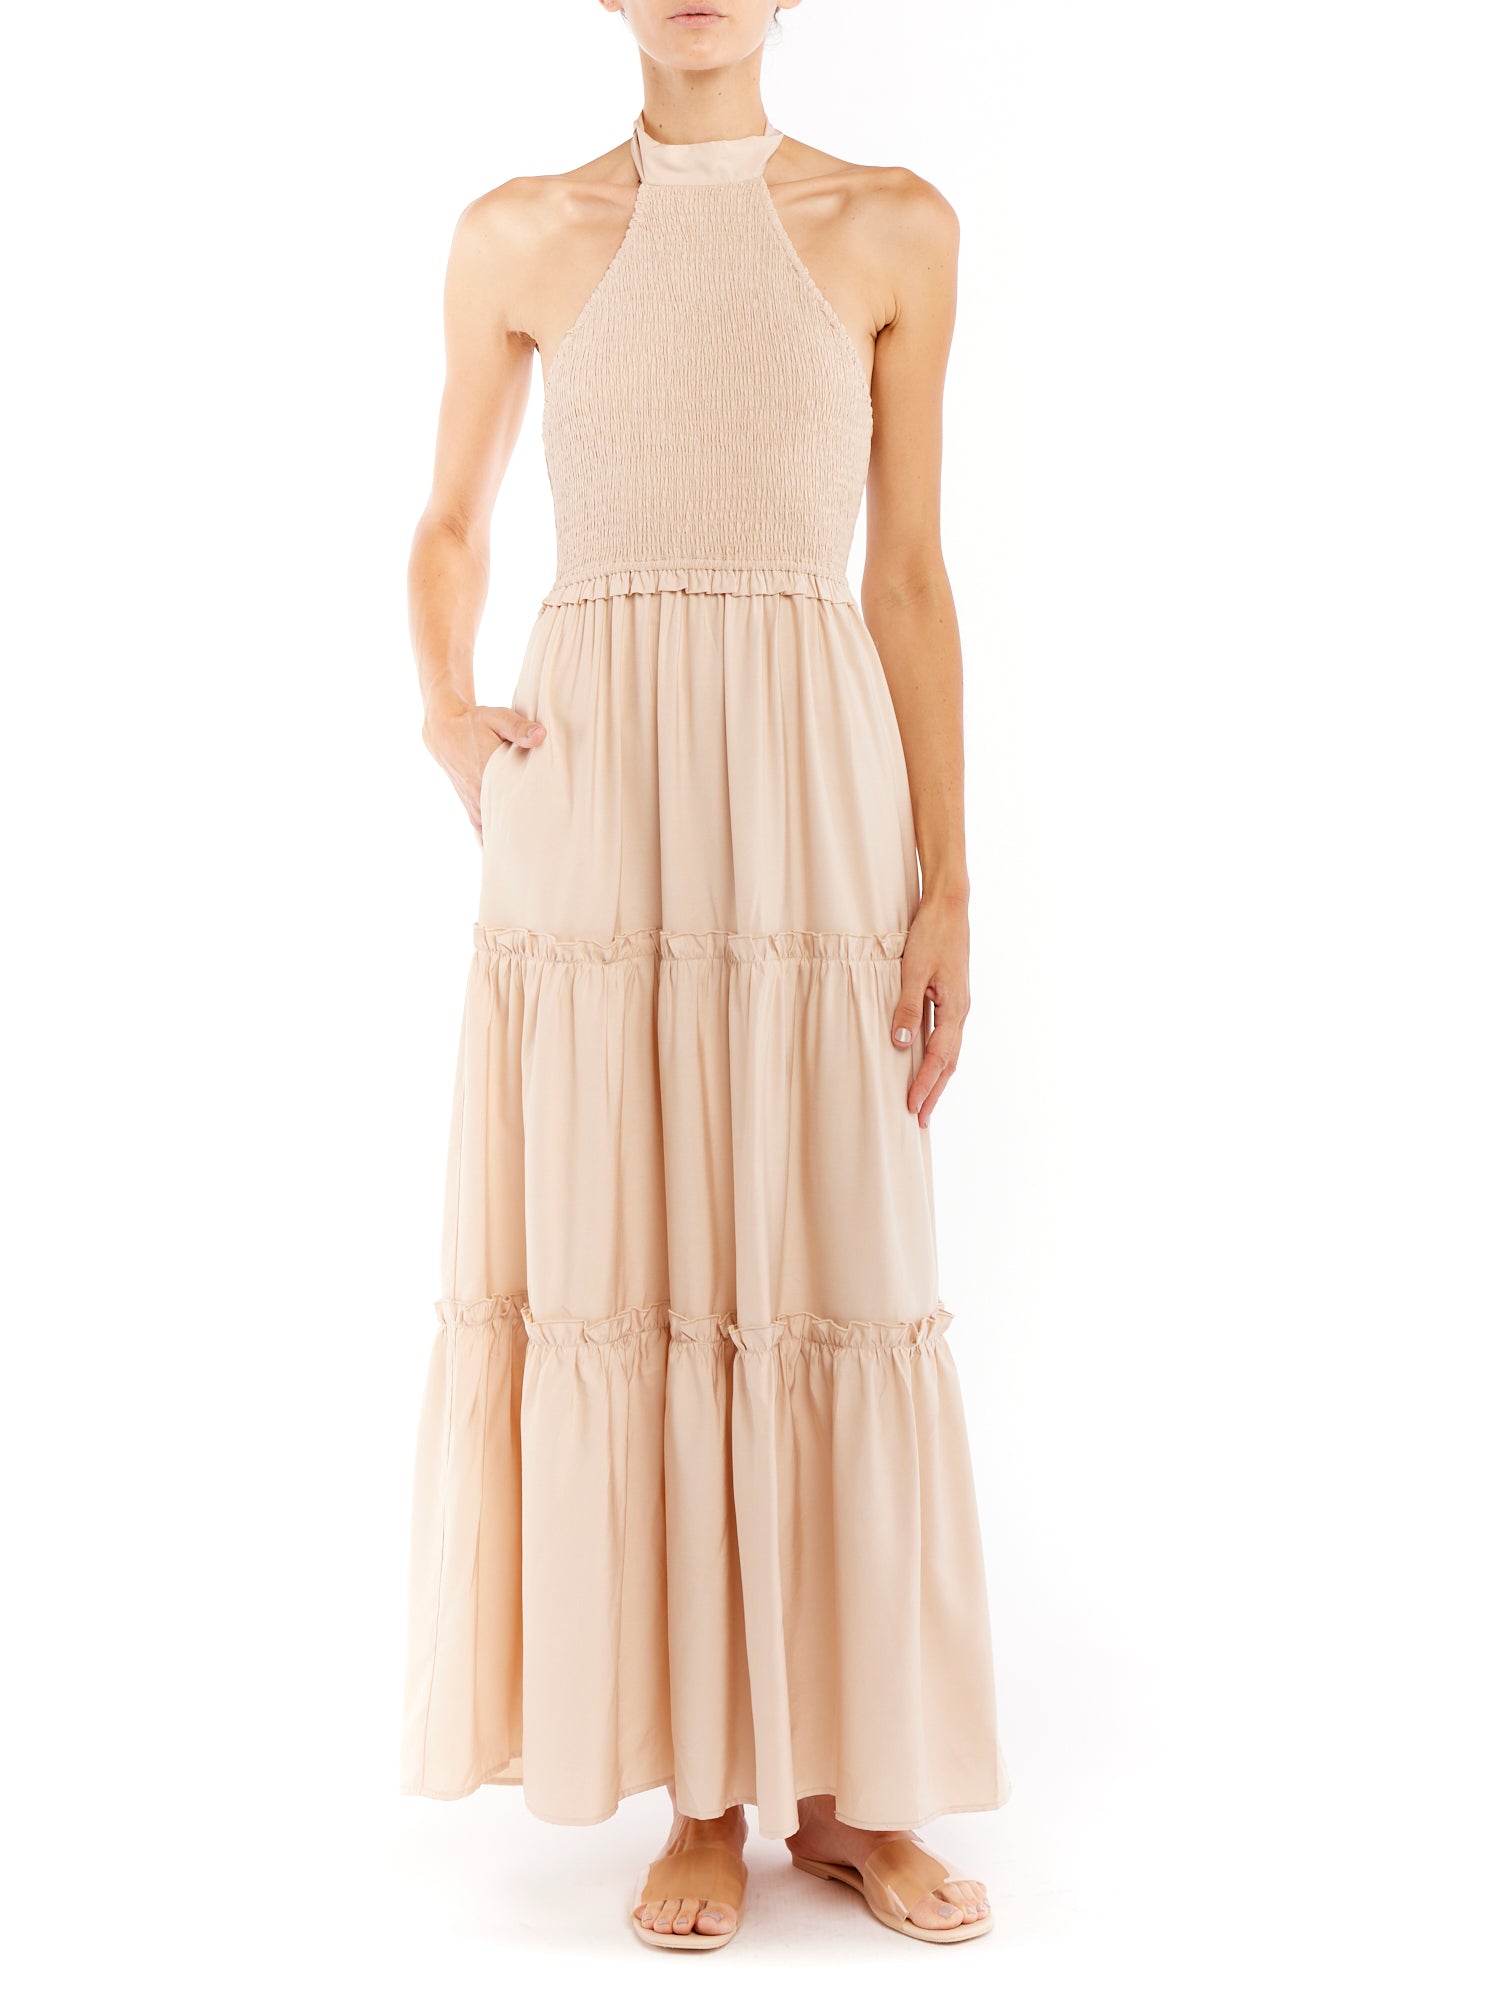 tiered maxi dress with mock neck, tie back halter, smocked bodice and back and ruffled detailing along the tiers in clay